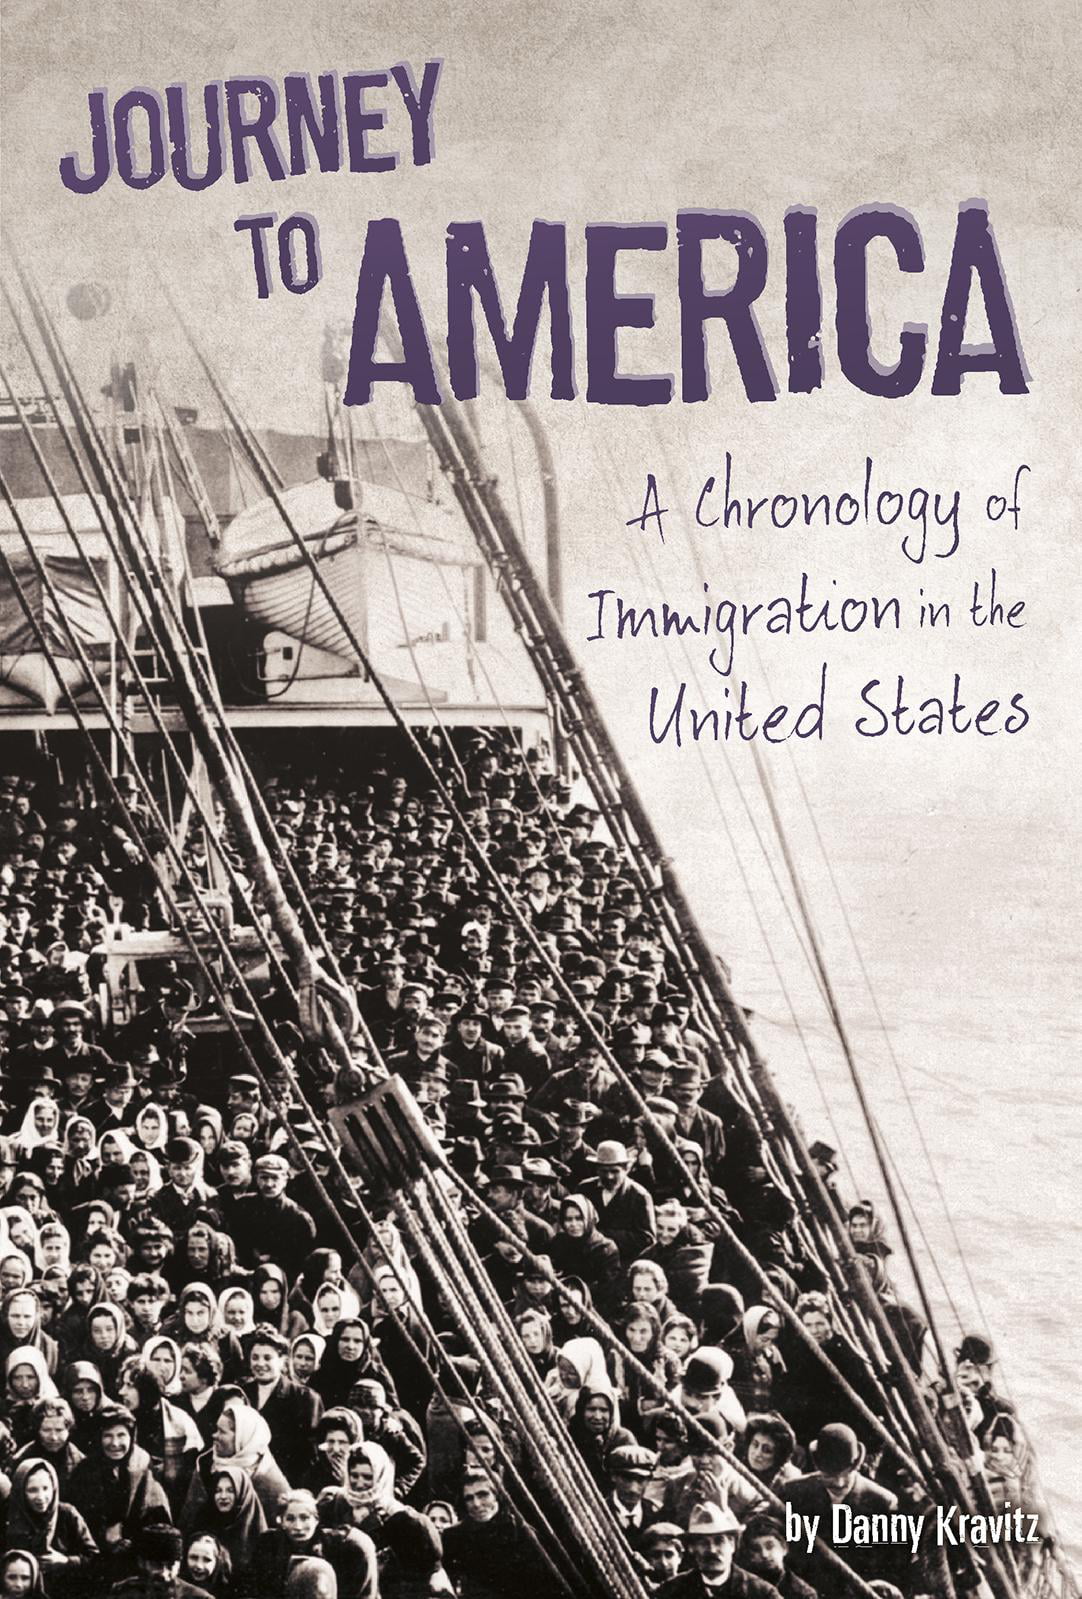 diary of immigrants journey to america 1900